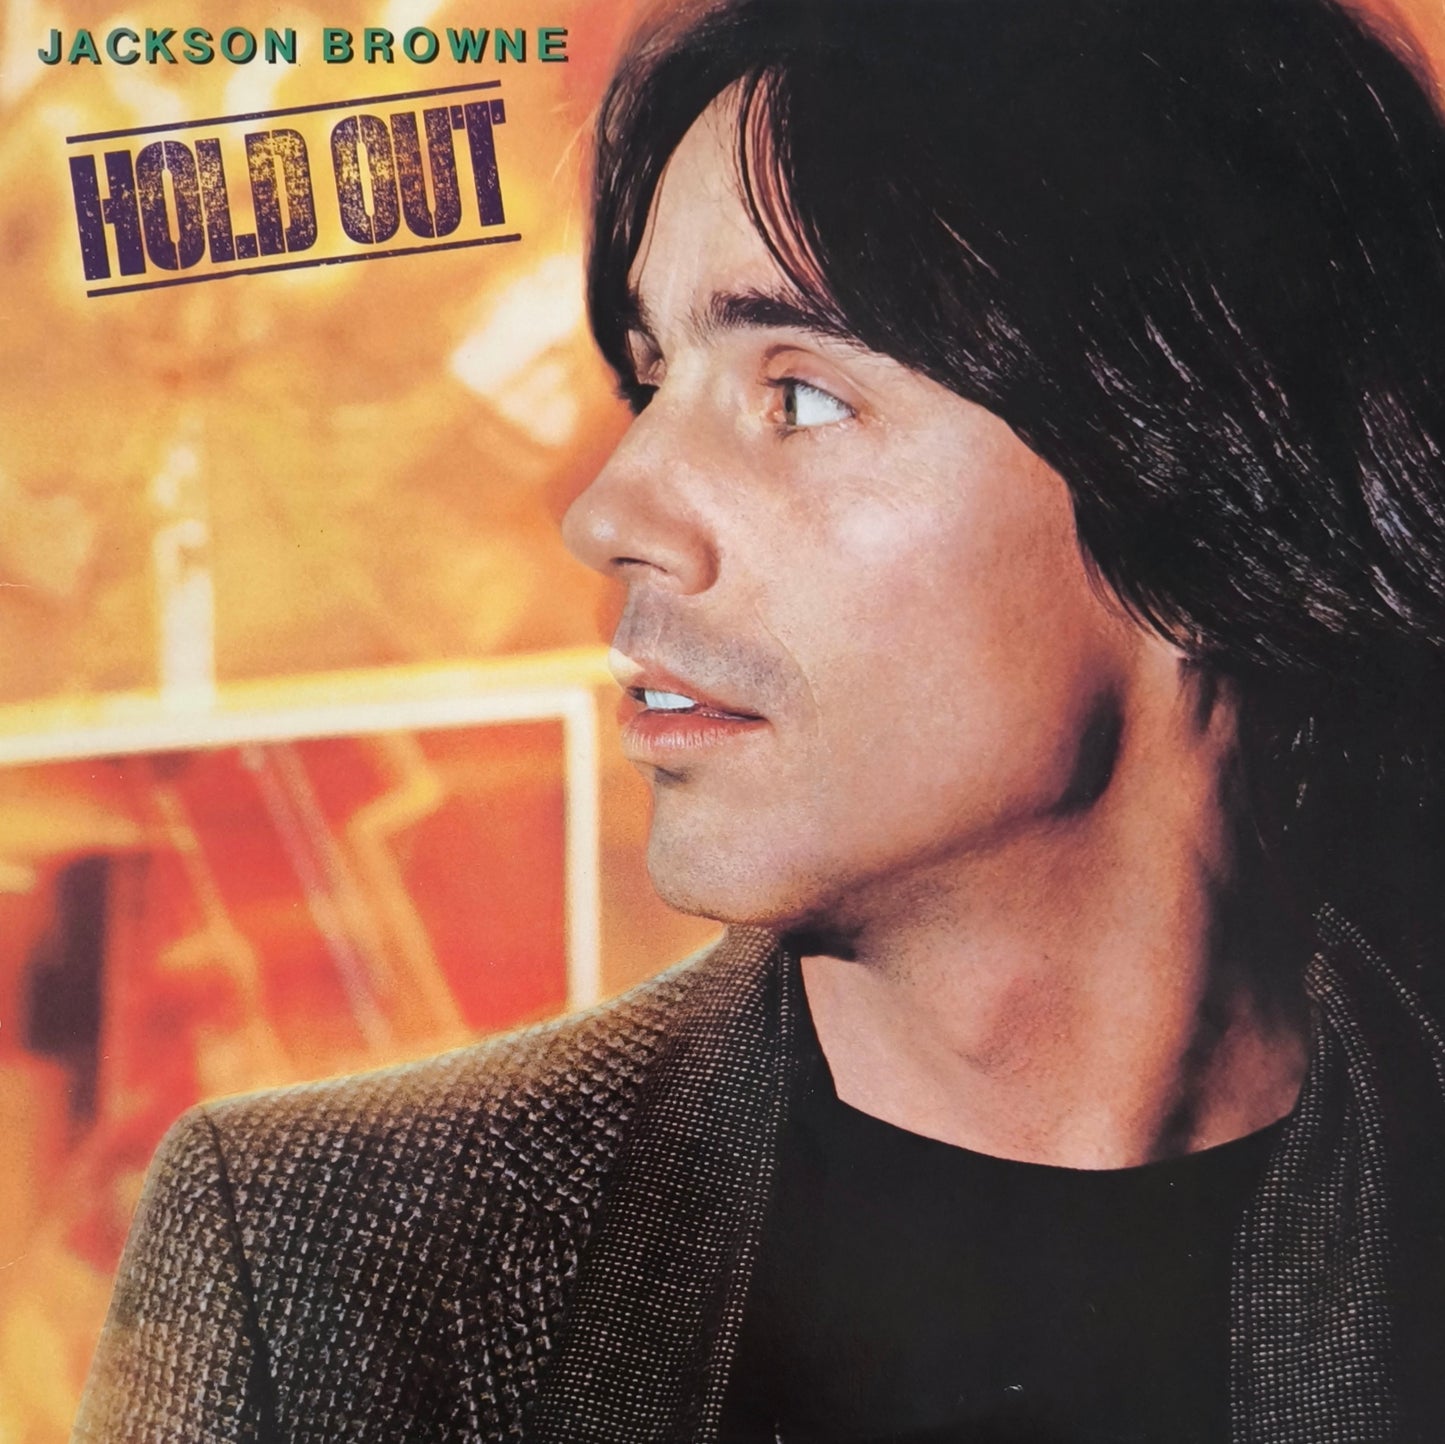 JACKSON BROWNE - Hold Out